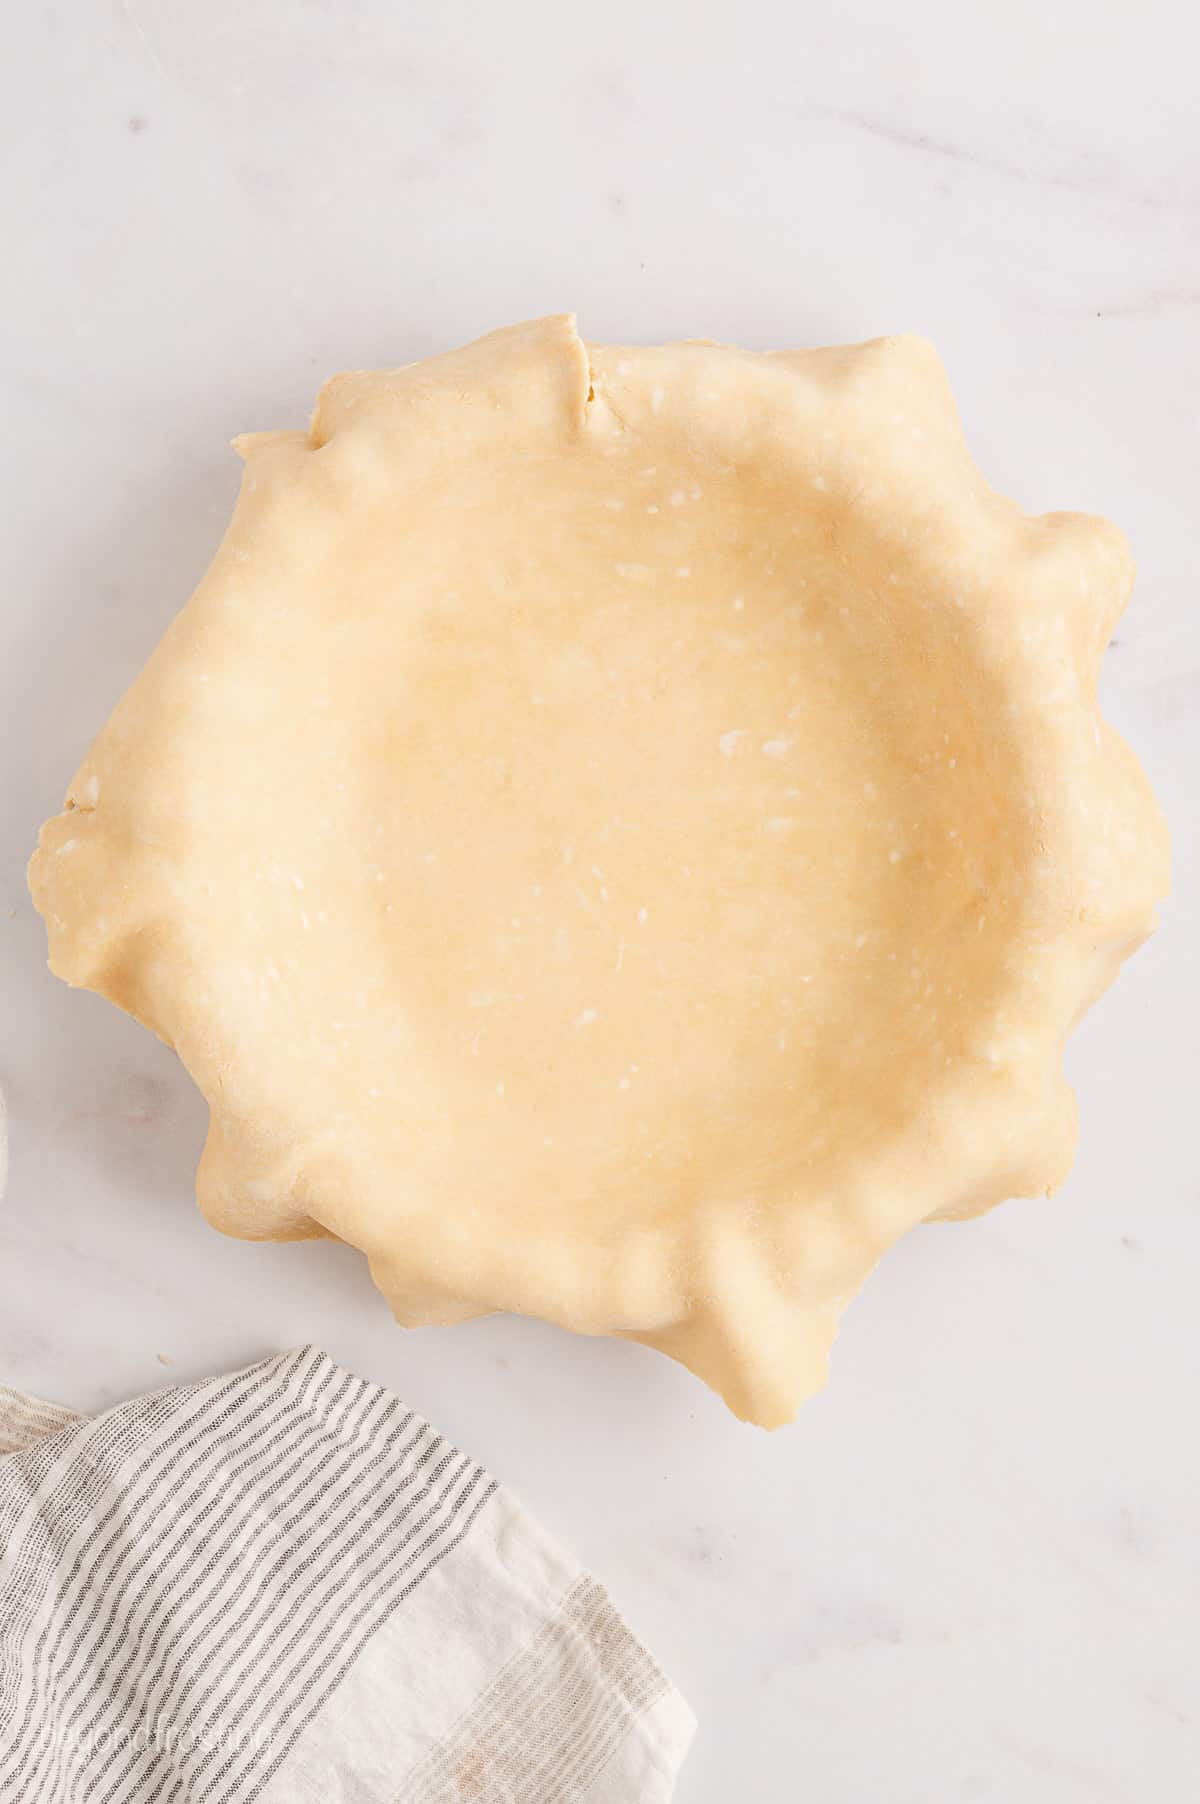 One half of a pie crust pressed into a pie plate.